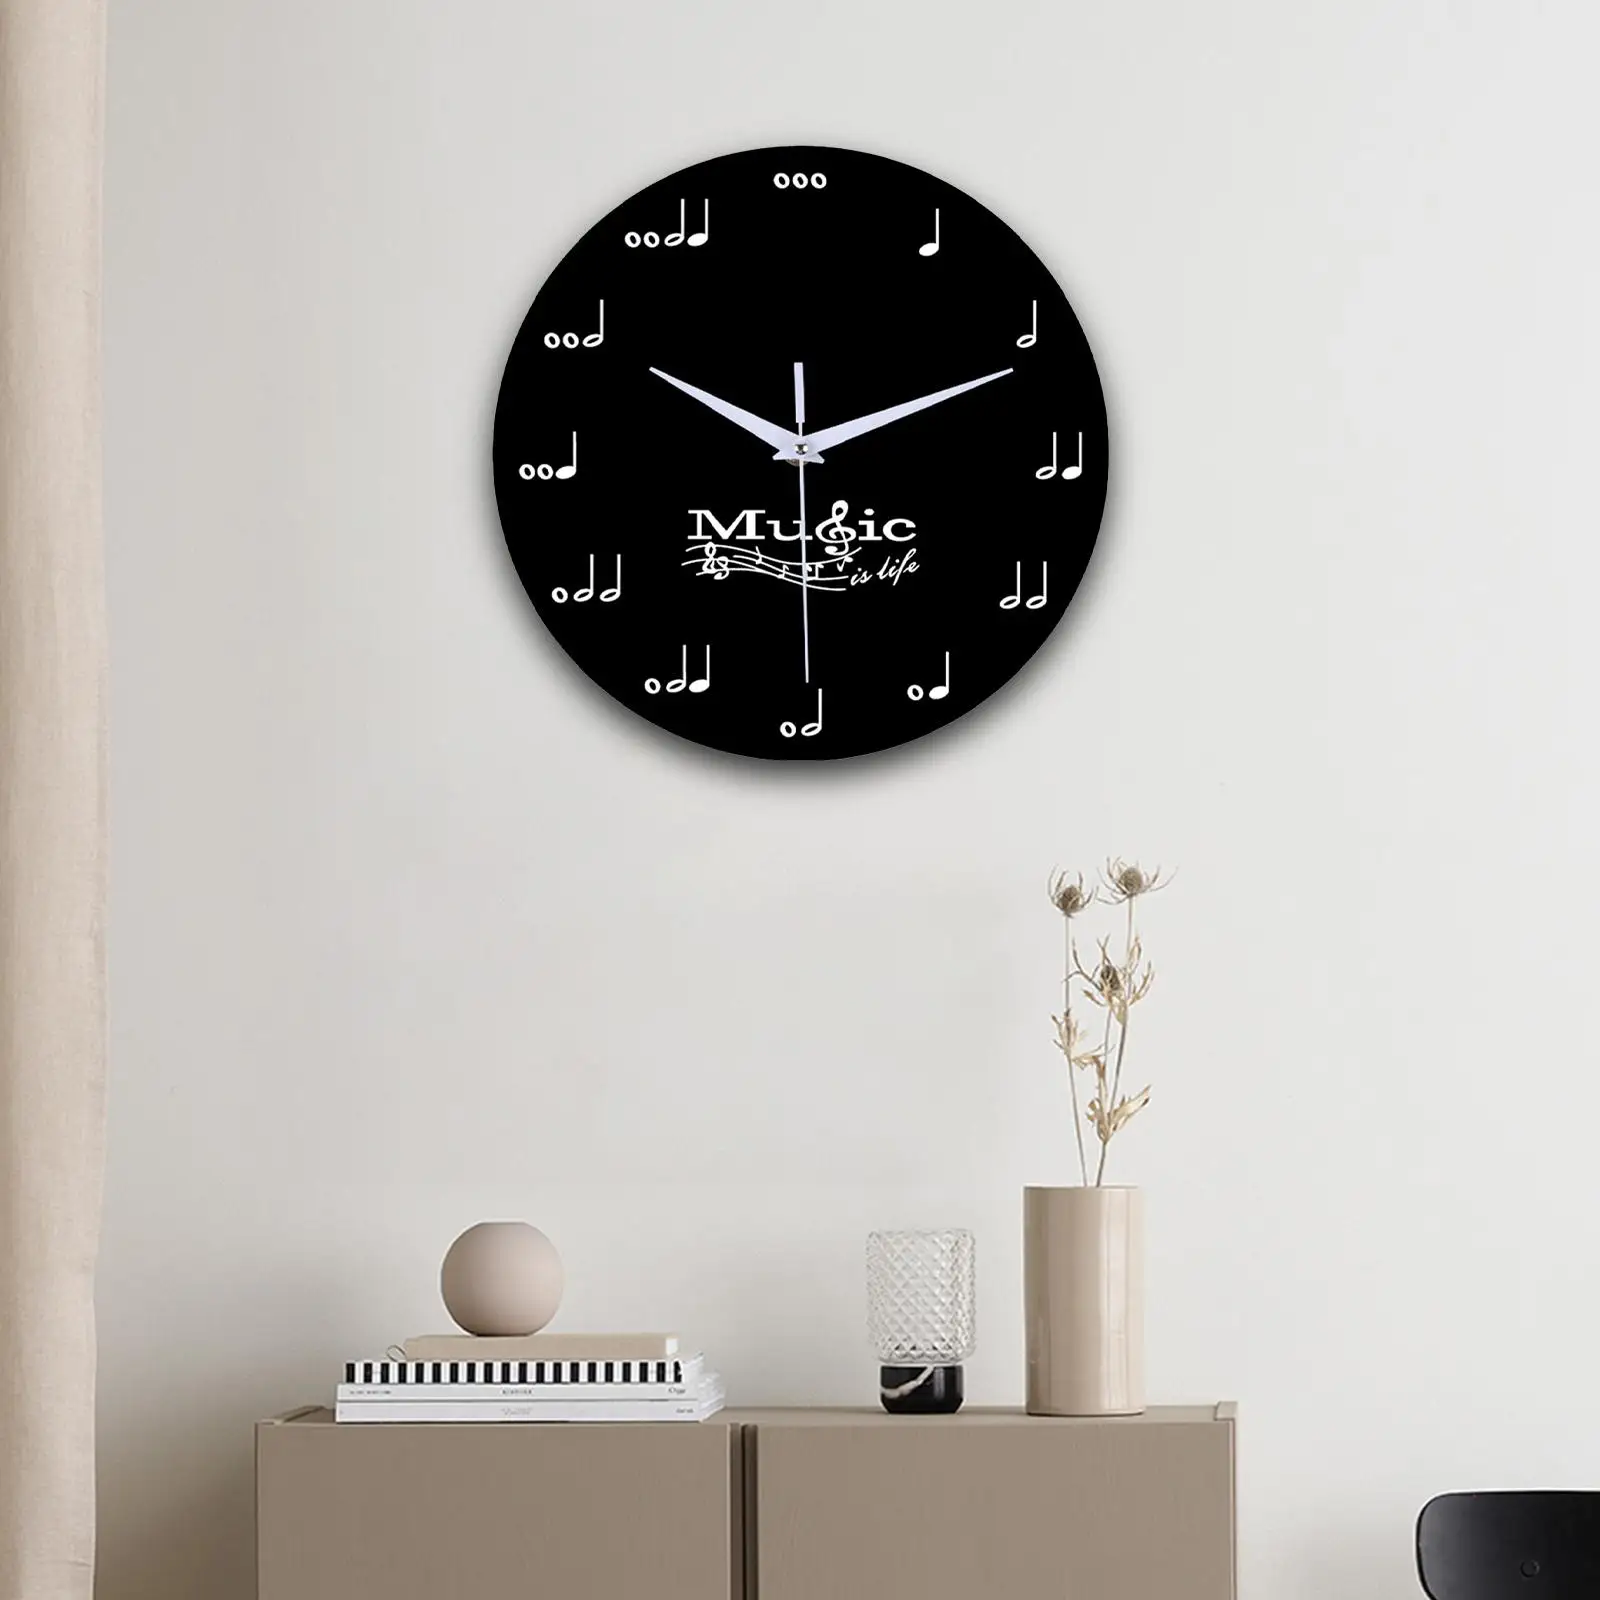 Wall Clock Round Decorative Quiet Creative Hanging Modern Musical Clocks for Kitchen Home Dining Room